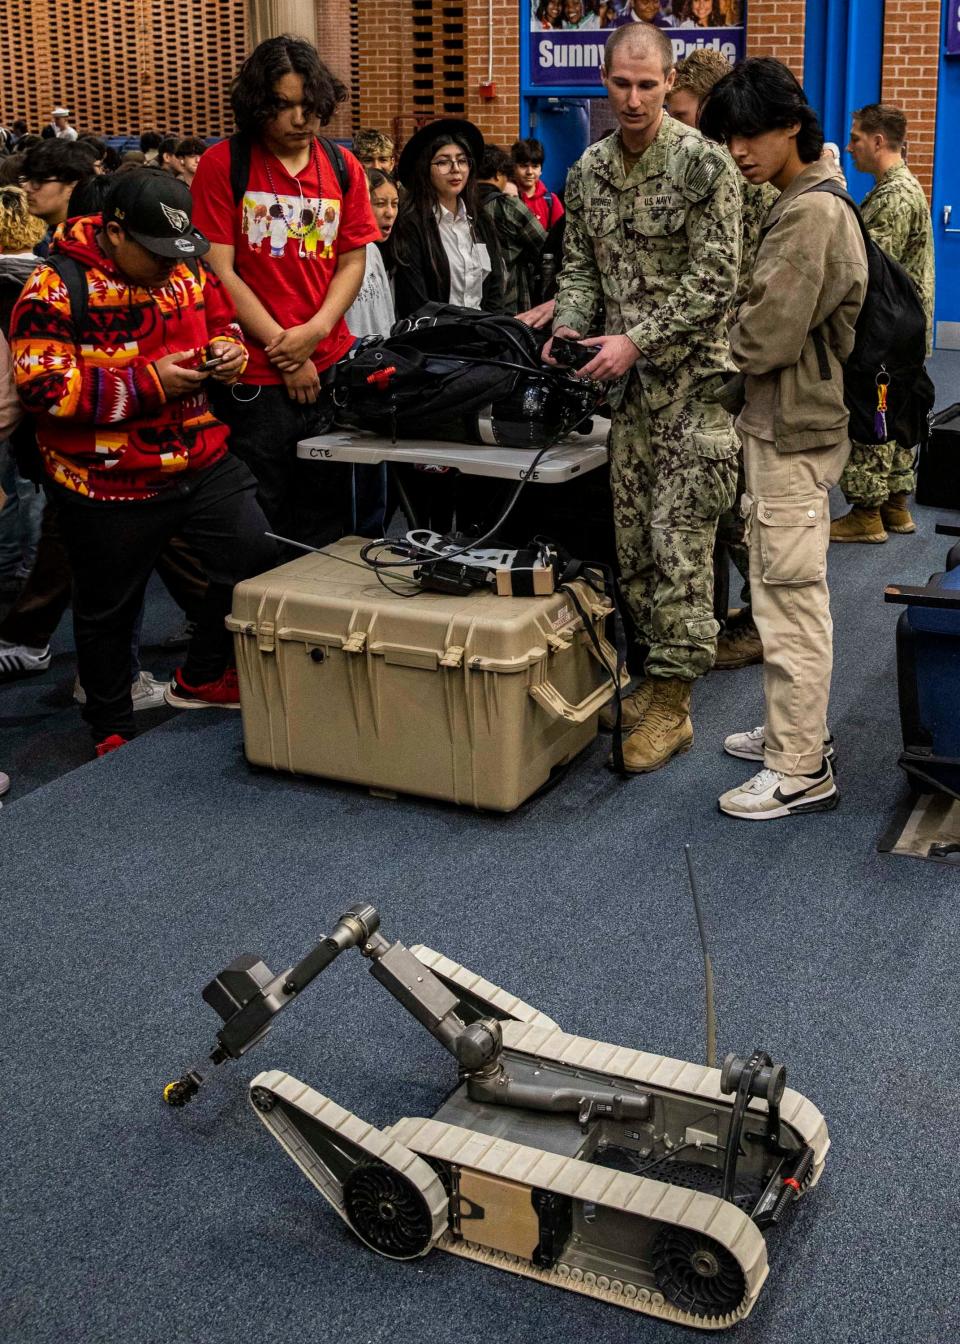 Robotic demonstrations are to be expected when a group of sailors visit salem's Kroc Center from 3:30-7 p.m. Monday as part of Navy Week festivities in the Willamette Valley.